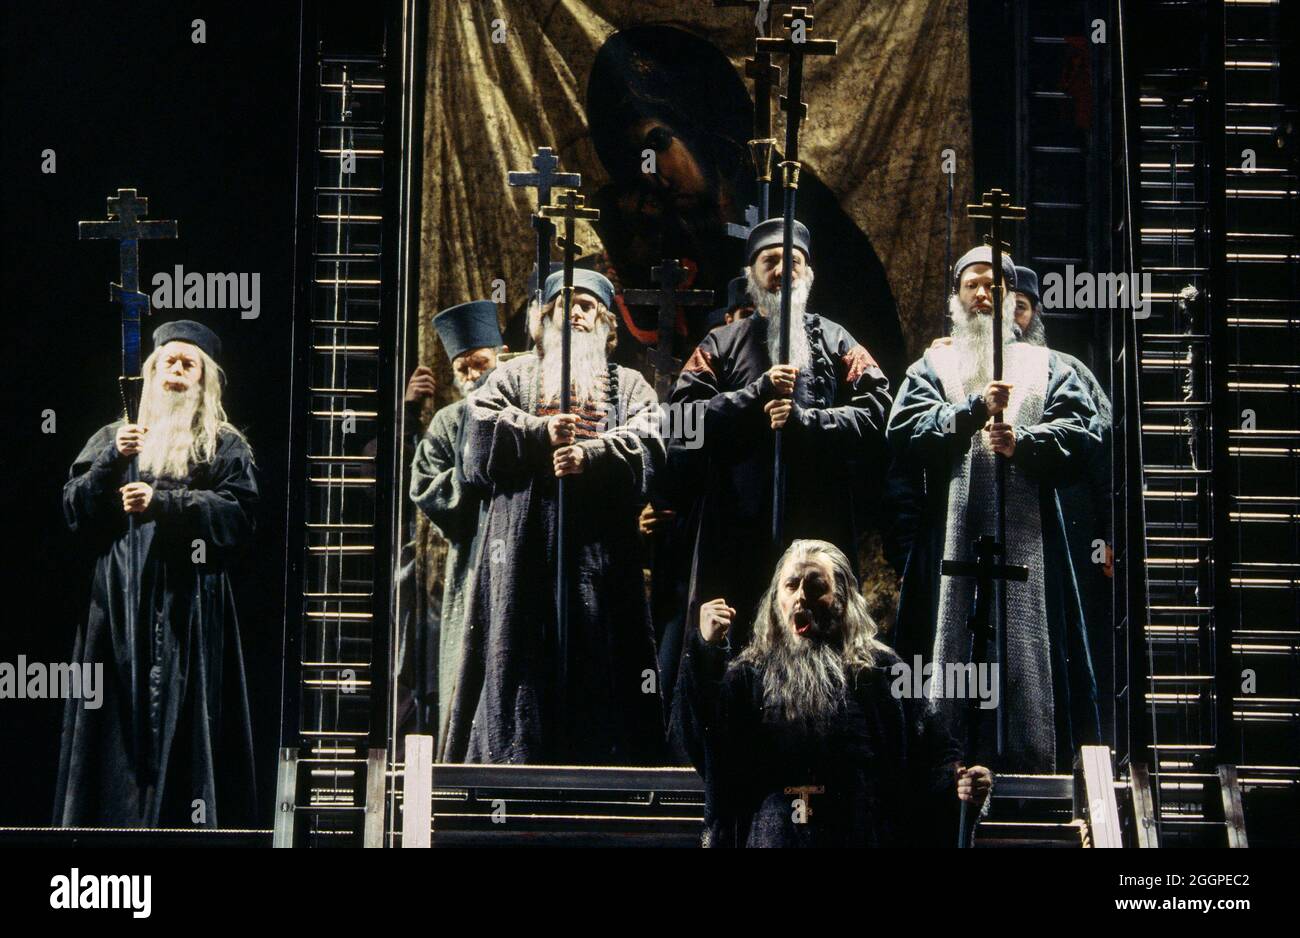 Front Centre: Gwynne Howell (Dosifey) with Fellow Old Believers in KHOVANSHCHINA performed by English National Opera (ENO) at the London Coliseum, London WC2 24/11/1994 Music & Libretto: Modest Mussorgsky Besetzung: Dmitri Schostakowitsch Leitung: Sian Edwards Gestaltung: Alison Chitty Beleuchtung: Paul Pyant Choreografin: Lea Anderson Regie: Cézanne Zambello Stockfoto